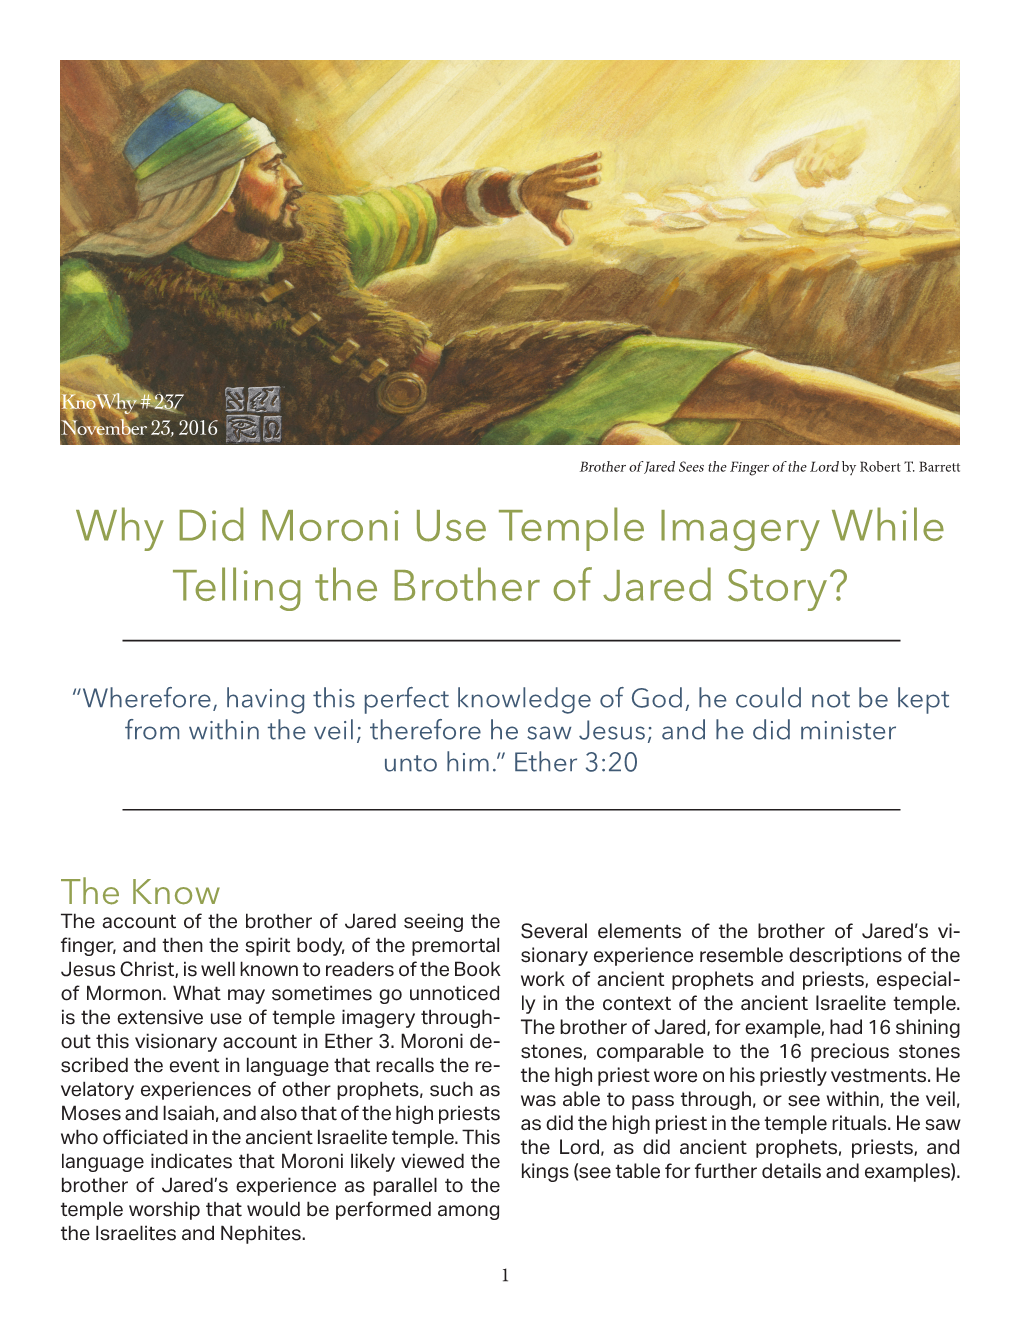 Why Did Moroni Use Temple Imagery While Telling the Brother of Jared Story?